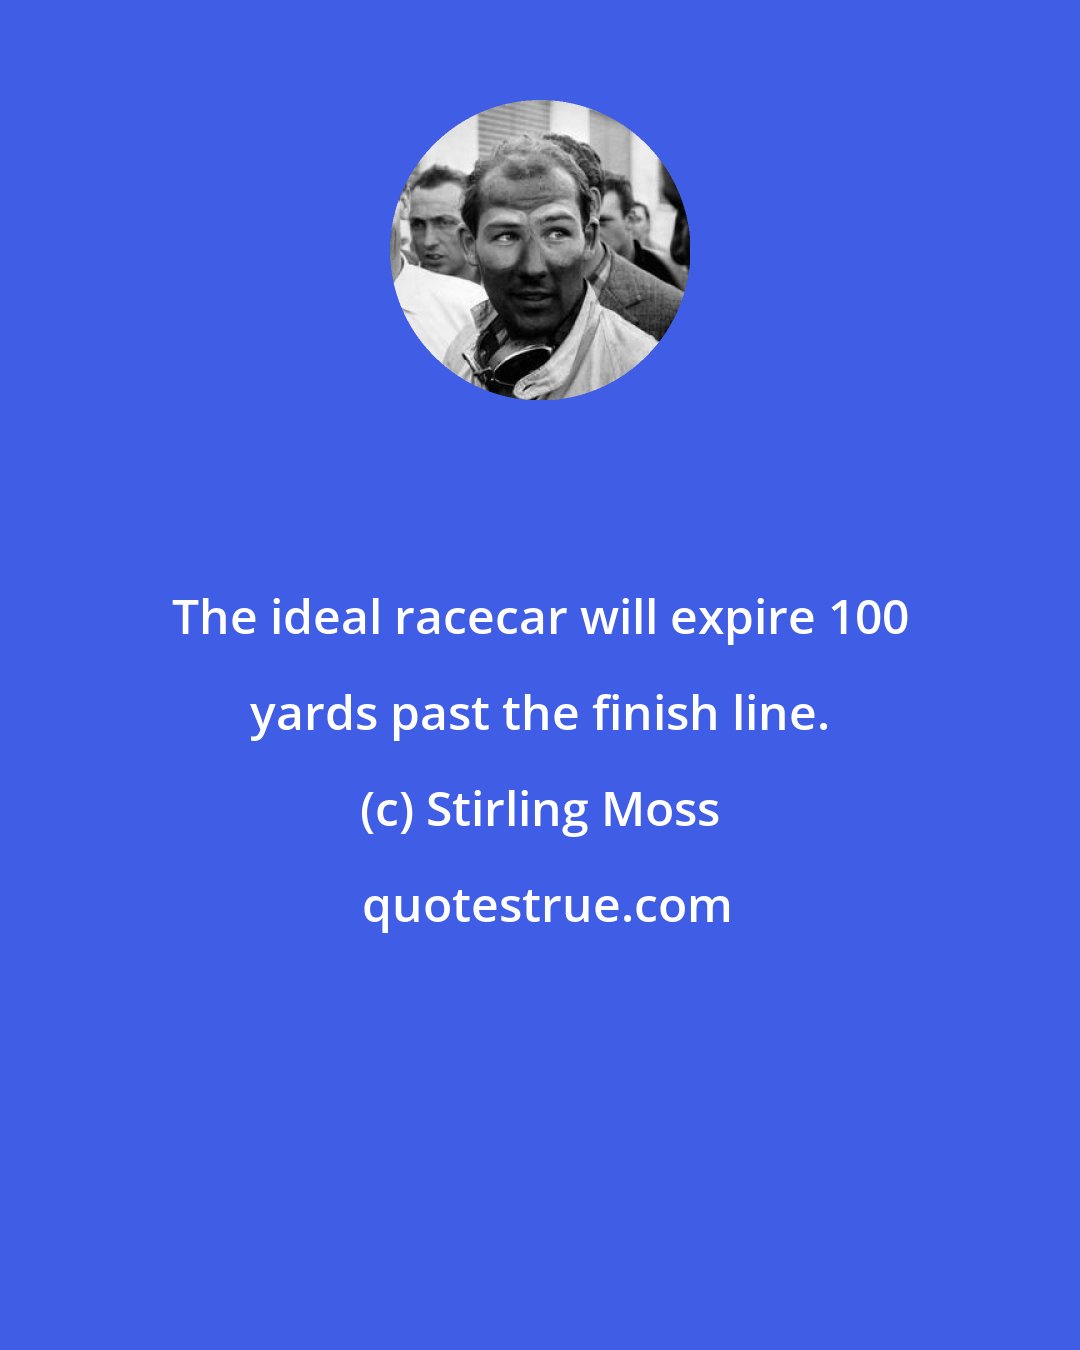 Stirling Moss: The ideal racecar will expire 100 yards past the finish line.